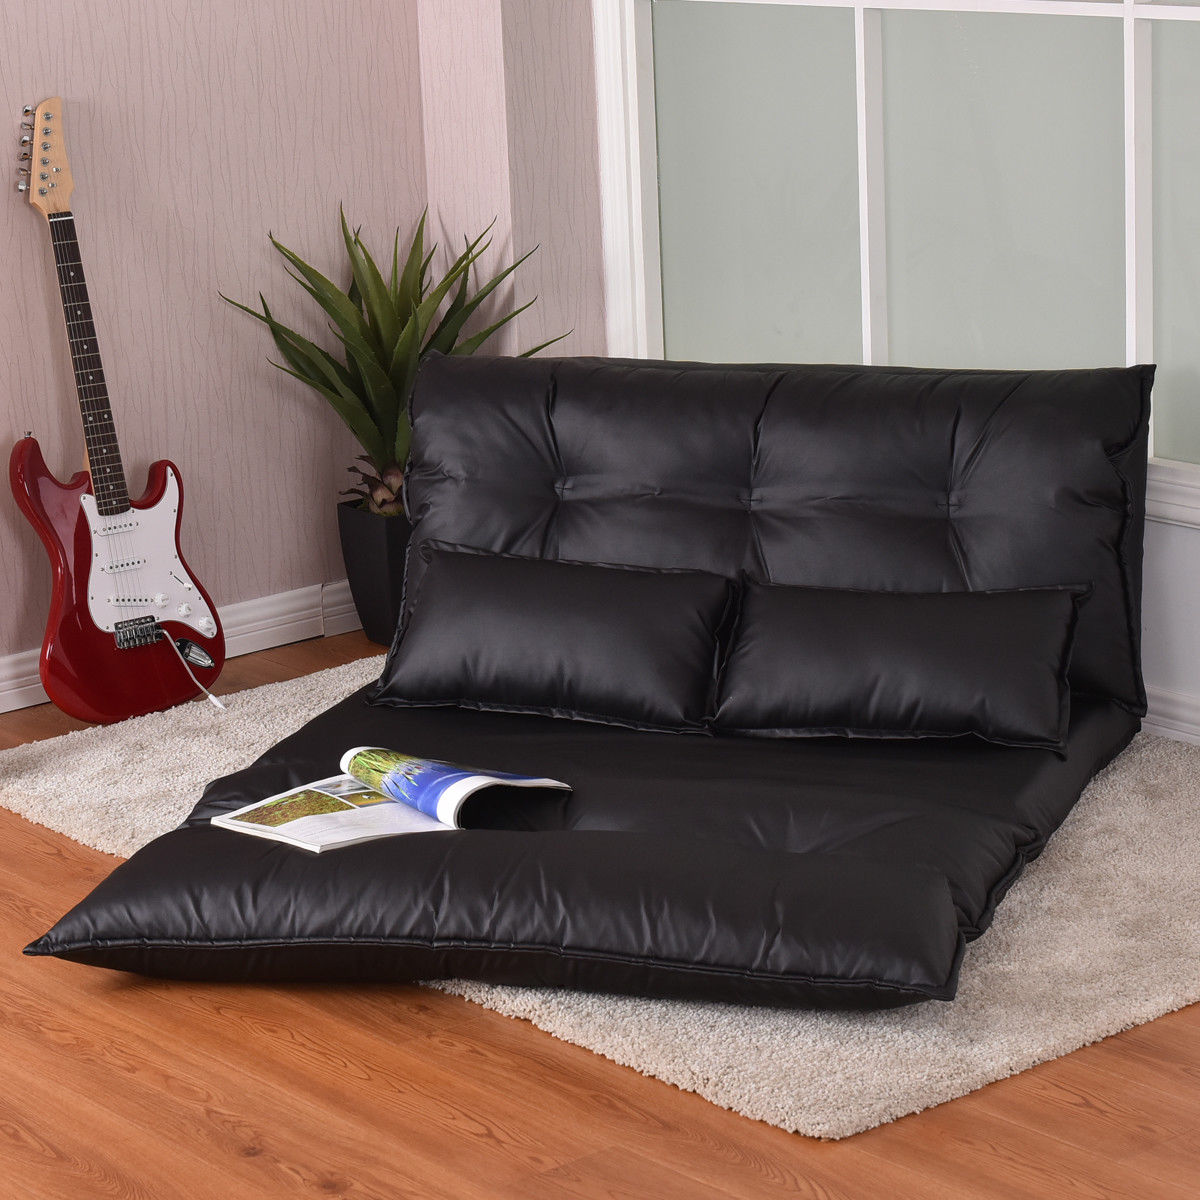 Costway PU Leather Foldable Modern Leisure Floor Sofa Bed Video Gaming 2 Pillows Black - image 1 of 7